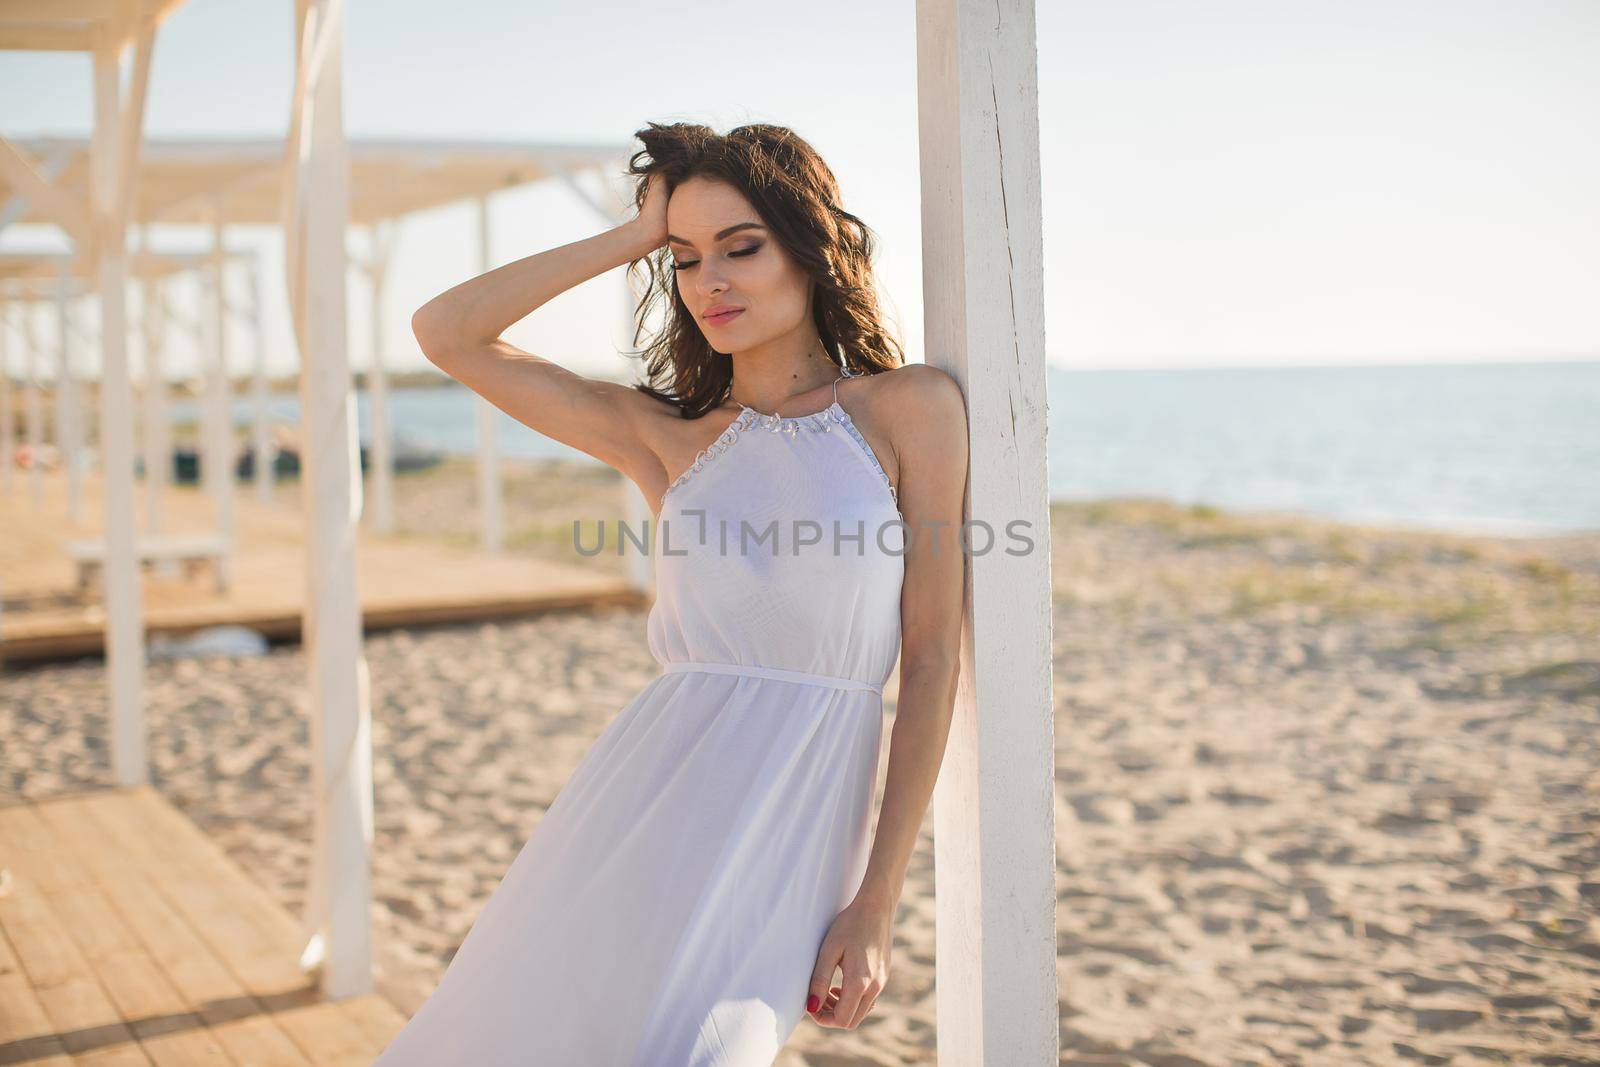 Beautiful girl on the beach in a white dress by StudioPeace